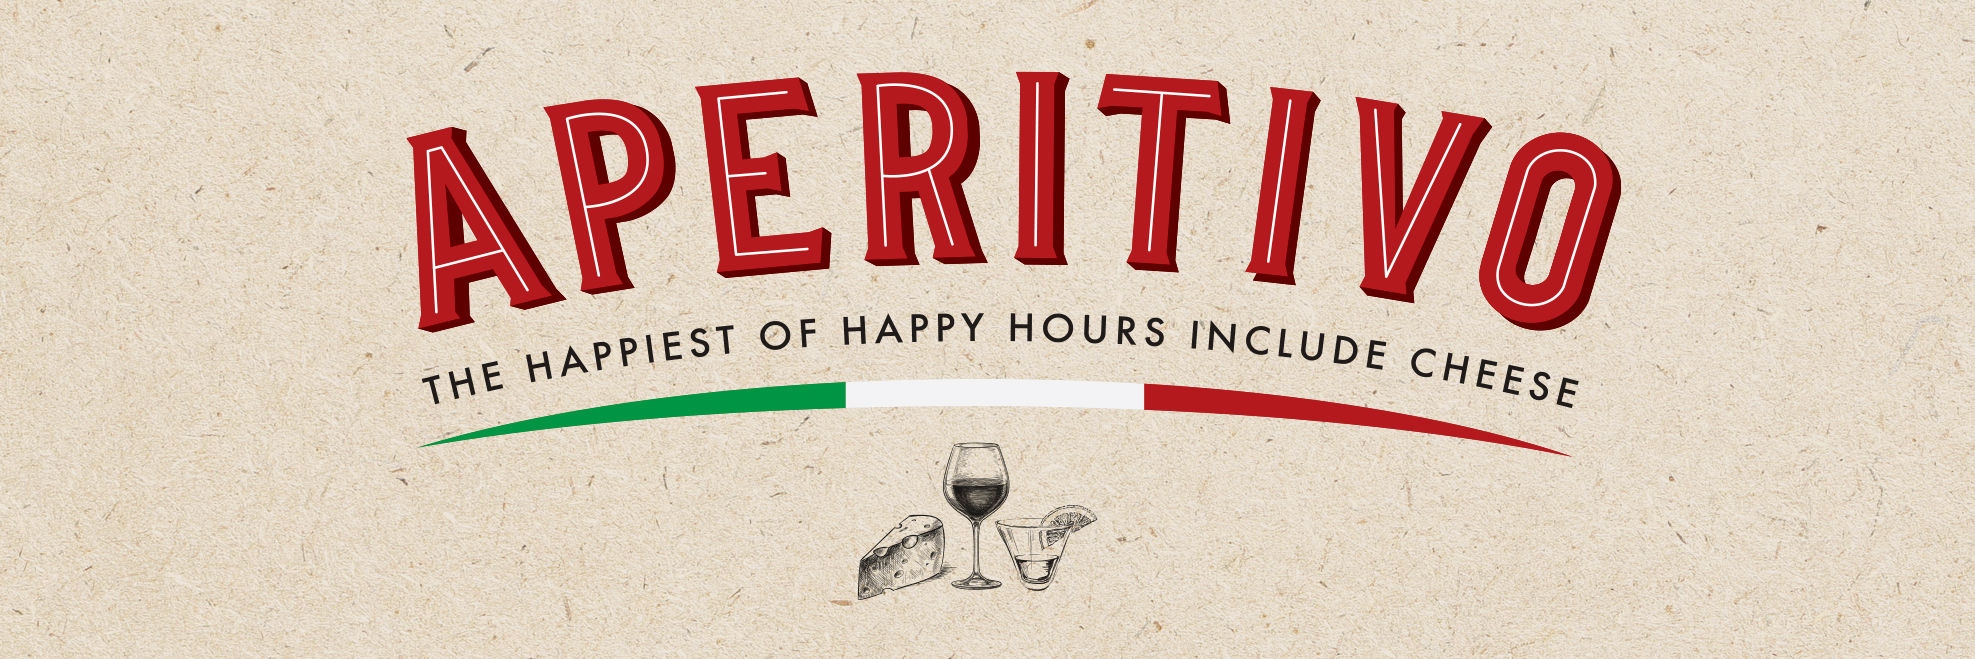 Aperitivo - The Happiest of Happy Hours Include Cheese